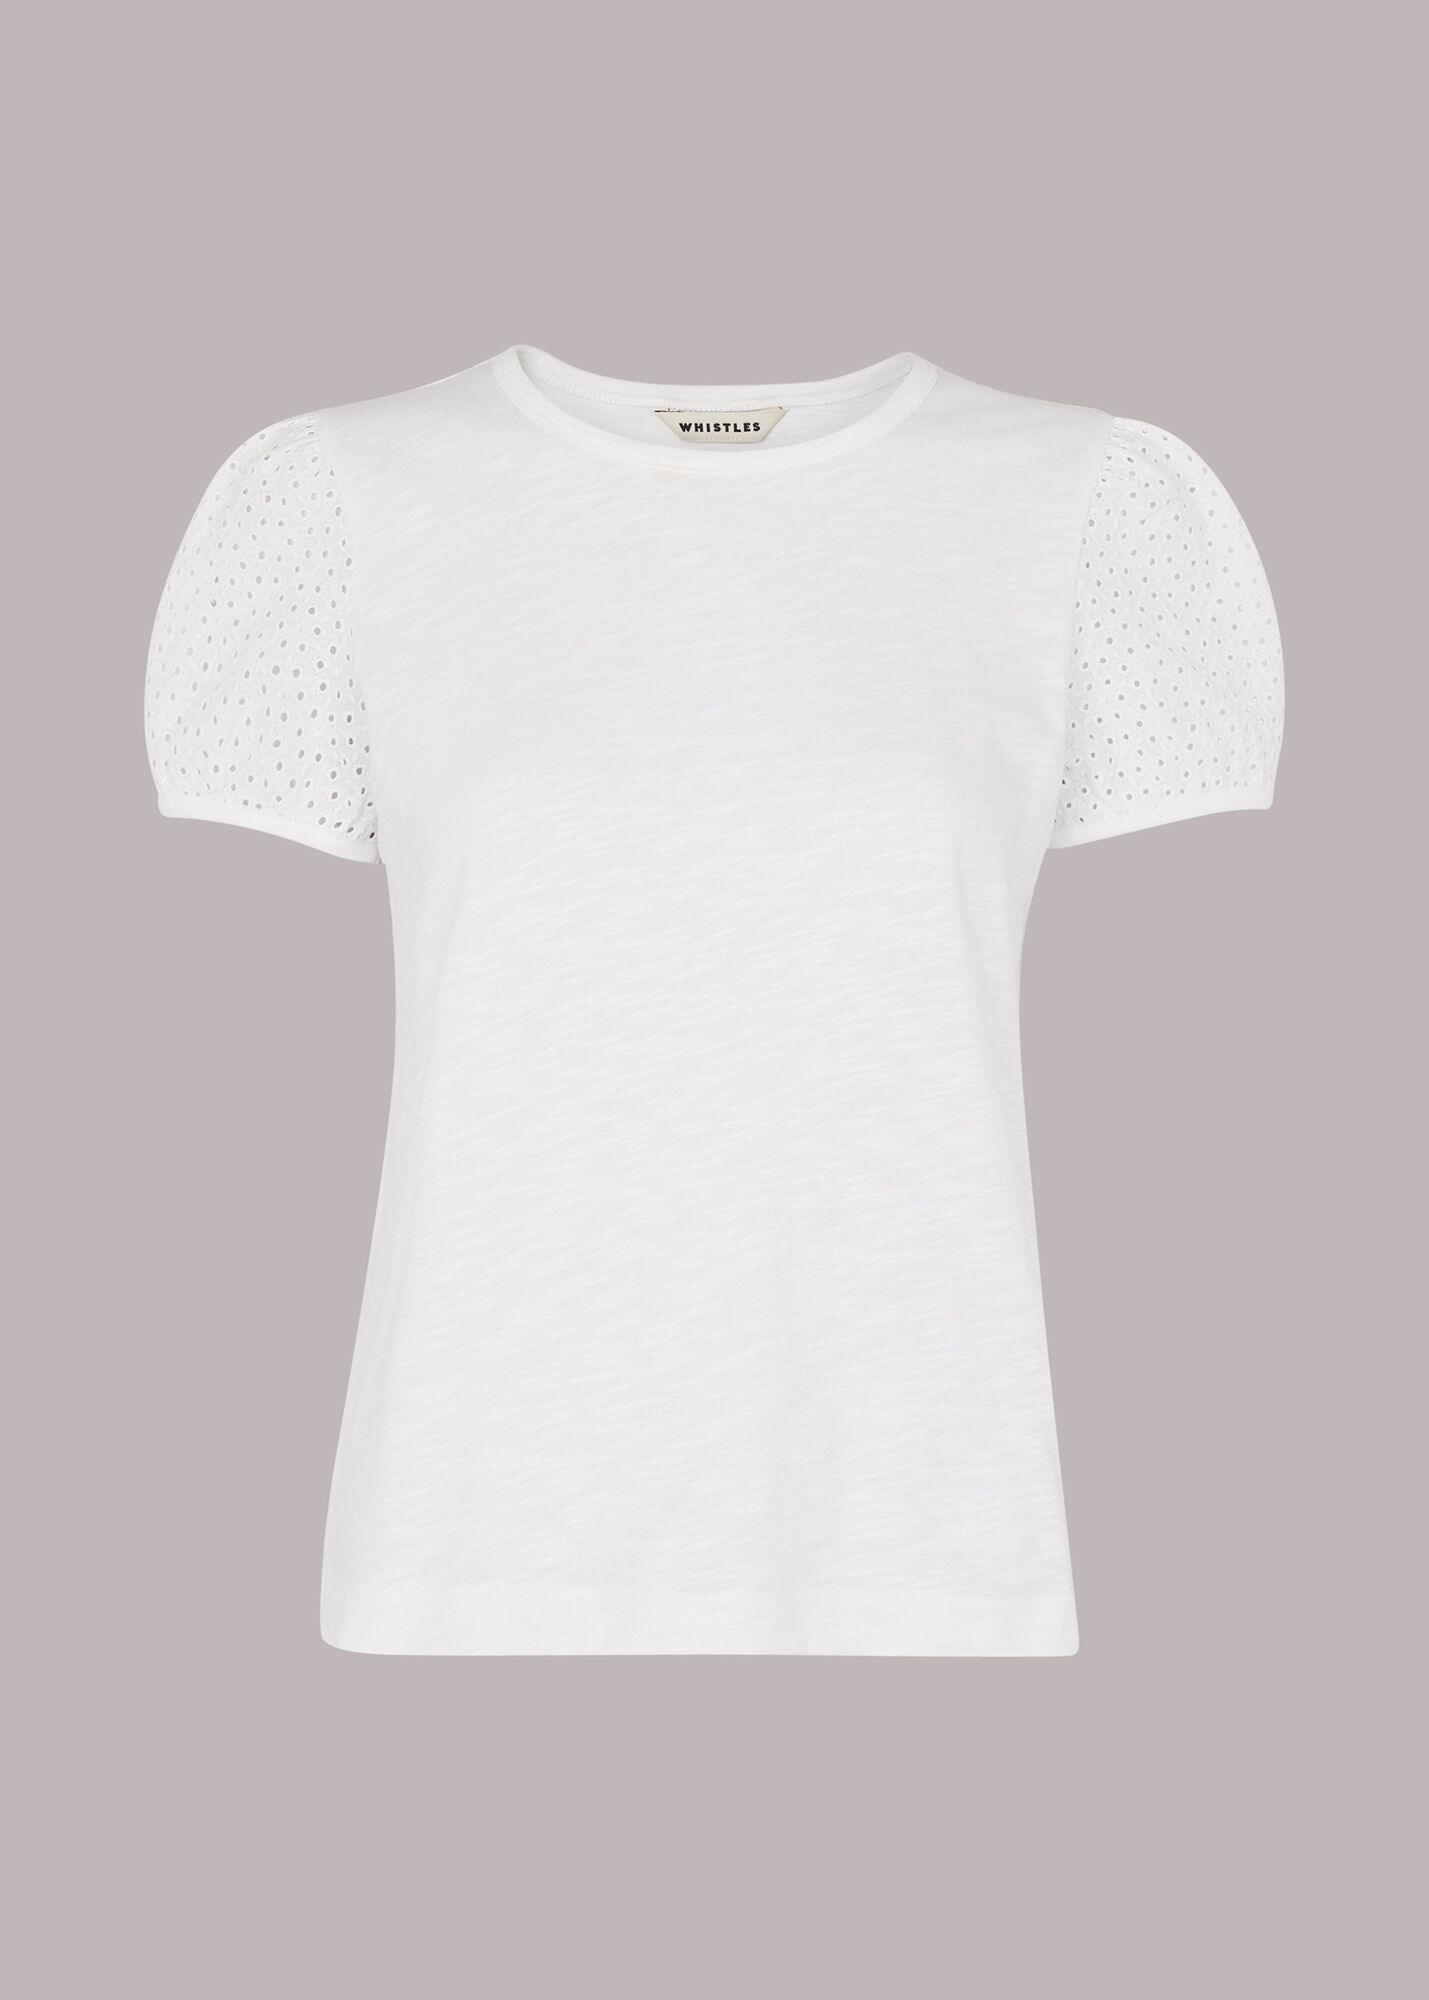 White Broderie Puff Sleeve T-Shirt | WHISTLES | Whistles